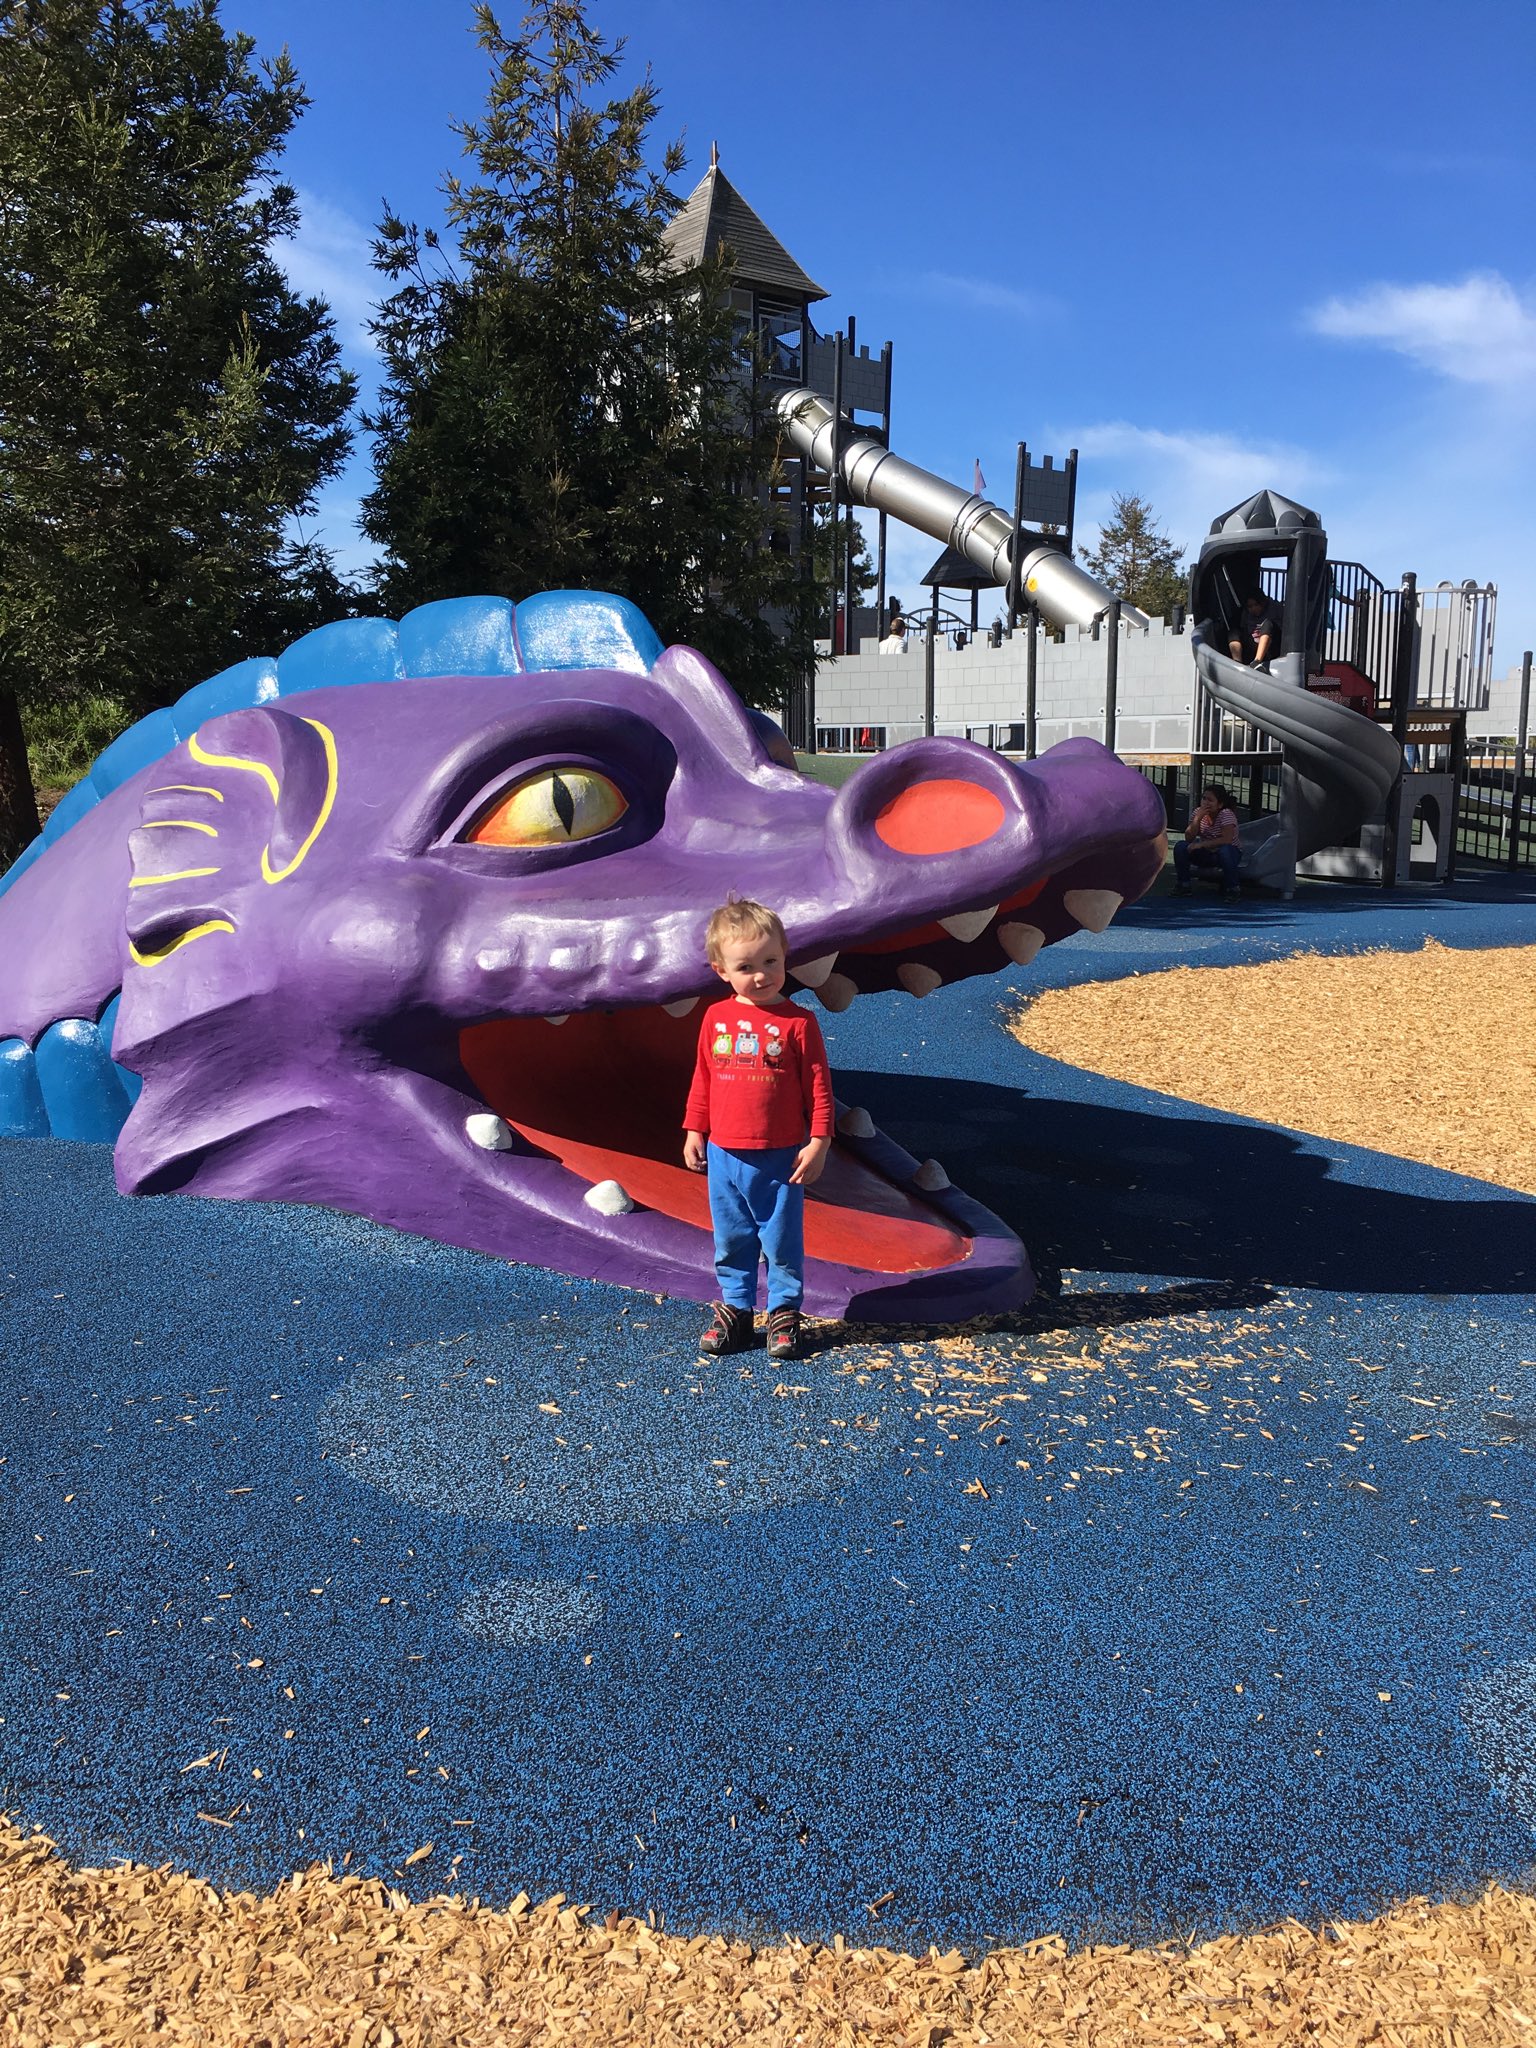 Young Julian stands in front of a large plastic dragon head that is part of the castle flavor of the playground.